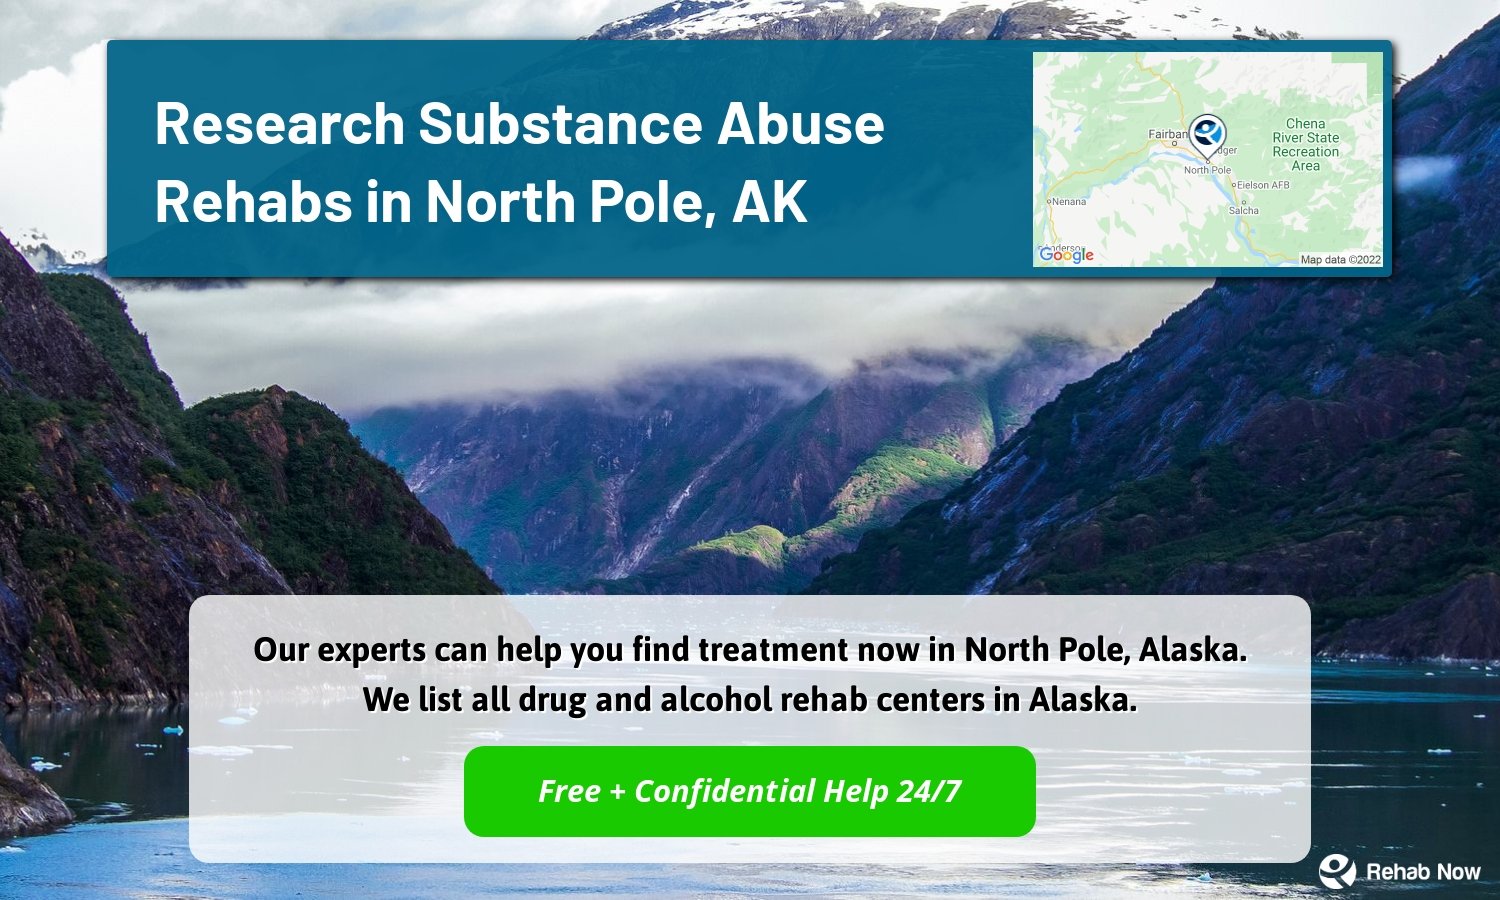 Our experts can help you find treatment now in North Pole, Alaska. We list all drug and alcohol rehab centers in Alaska.